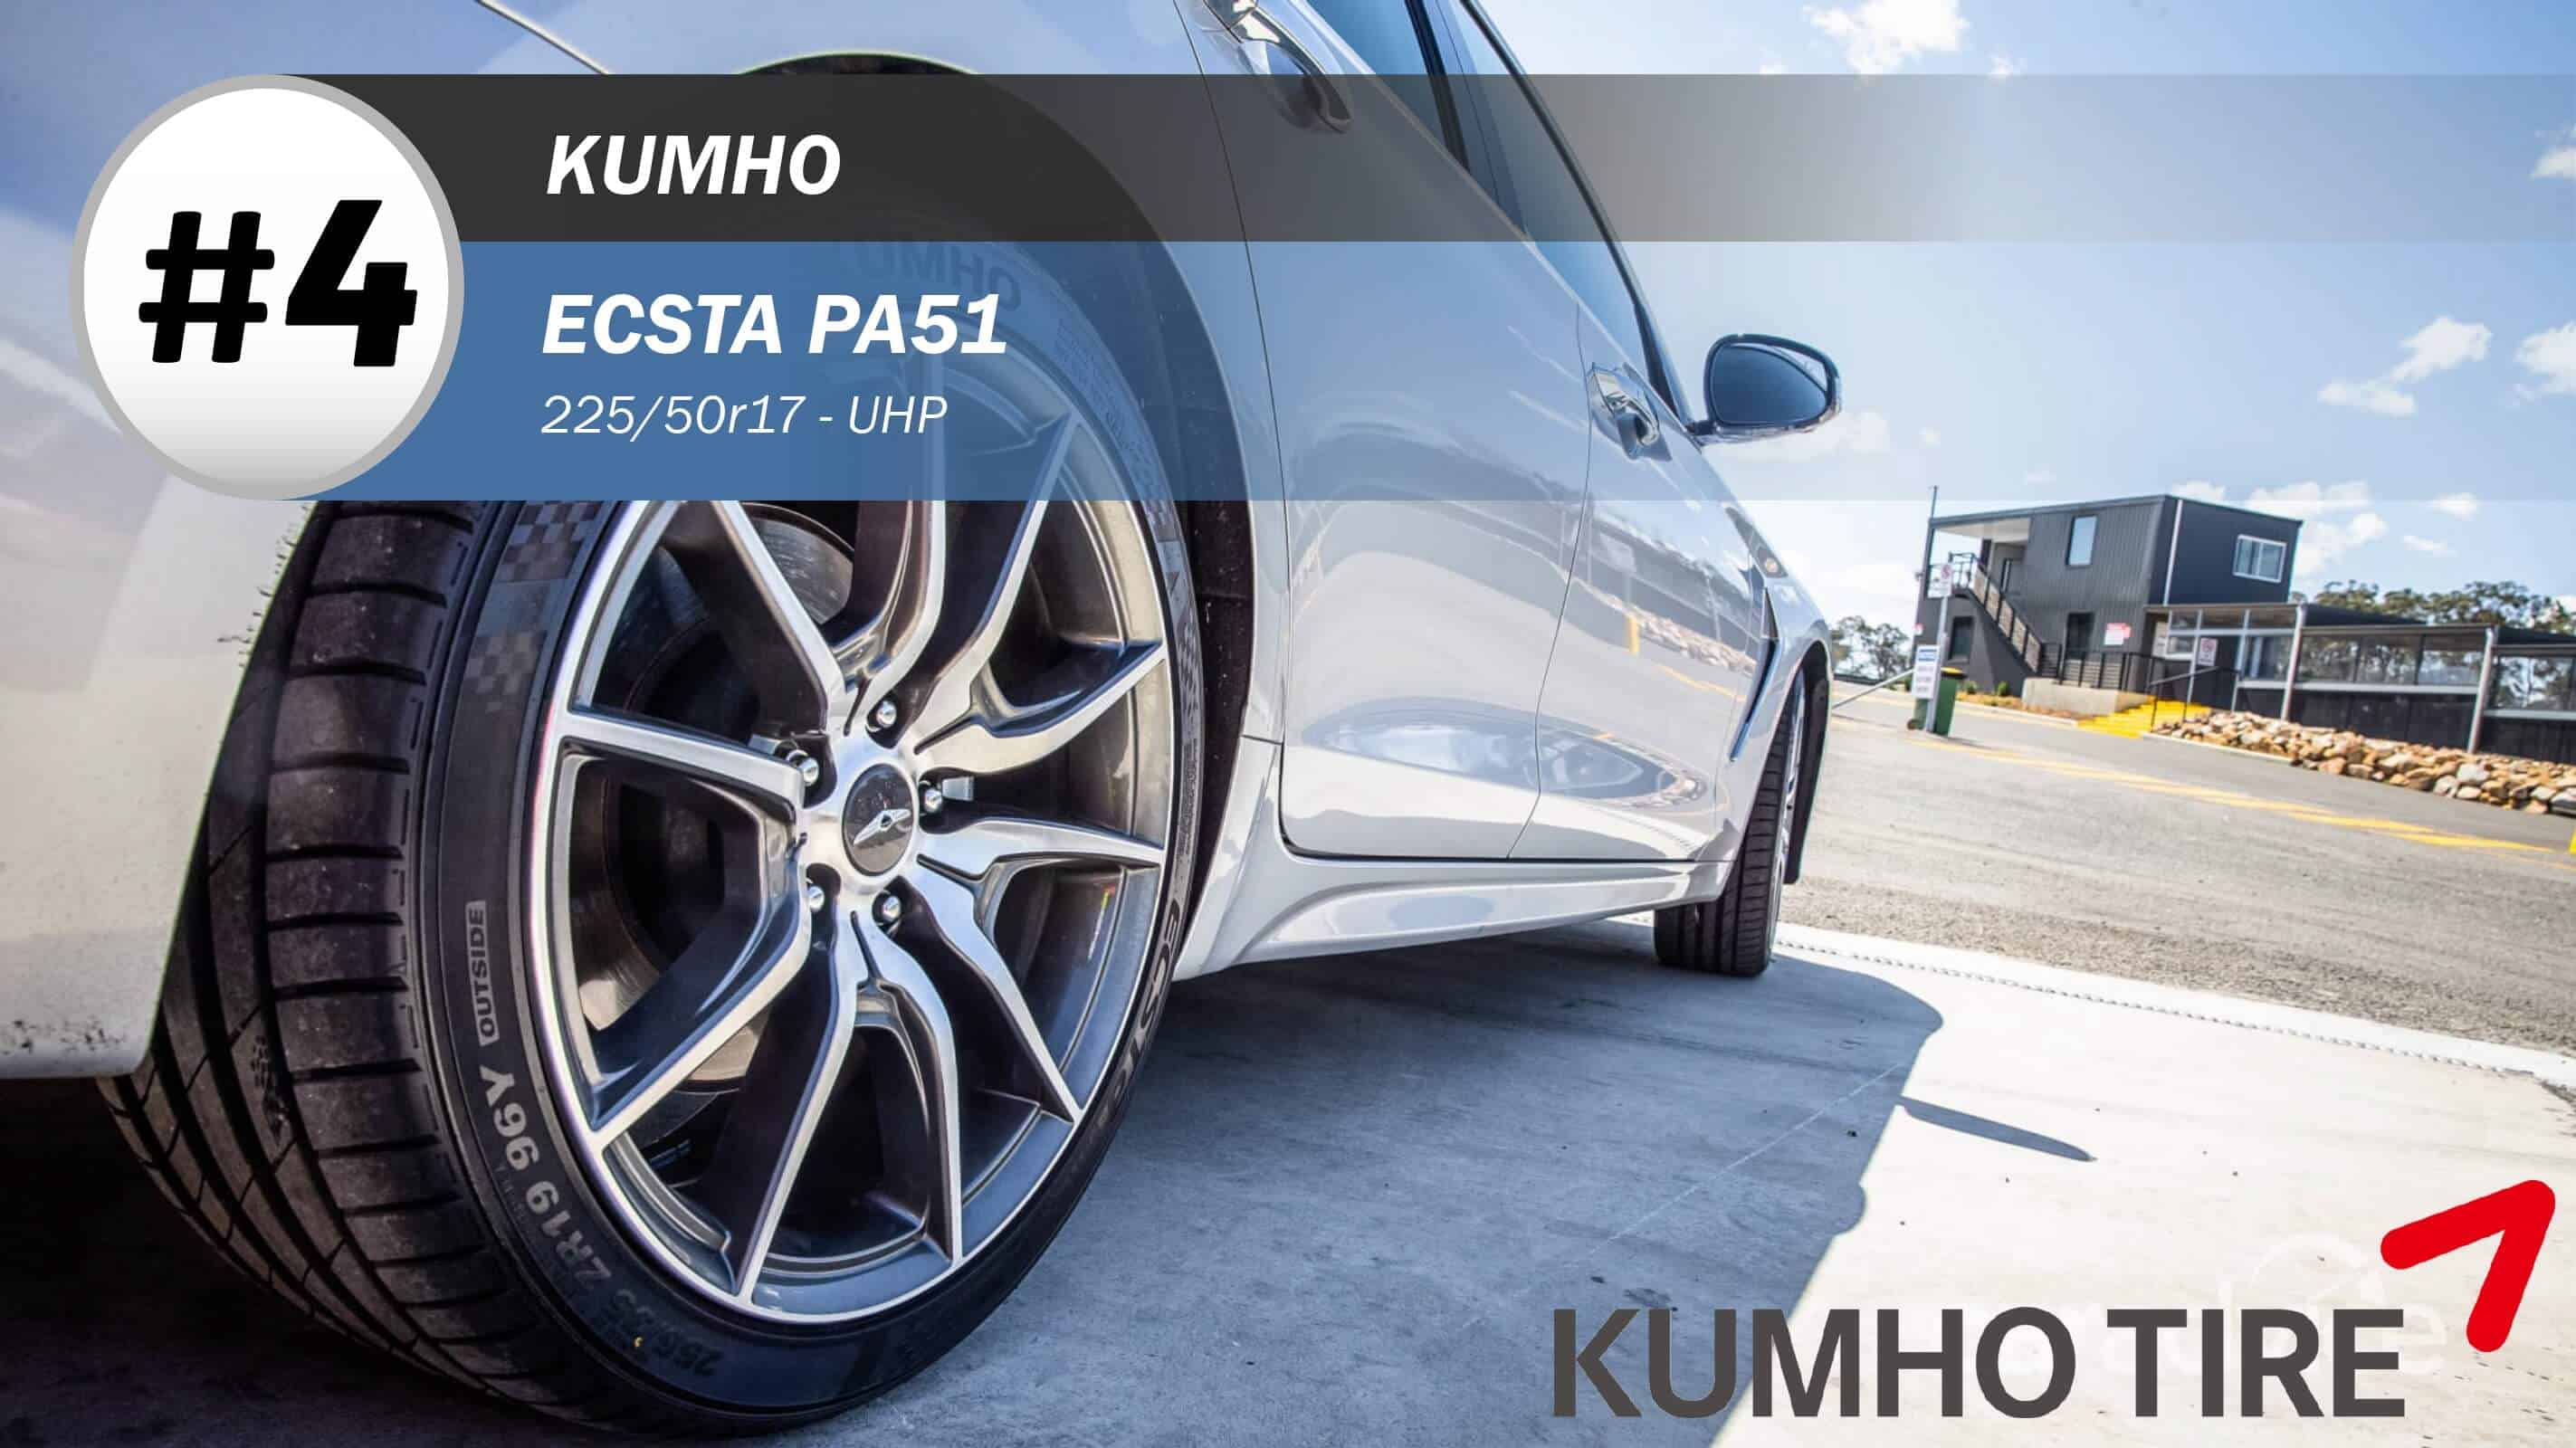 Top #4 UHP Tires: Kumho Ecsta PA51– 225/50R17